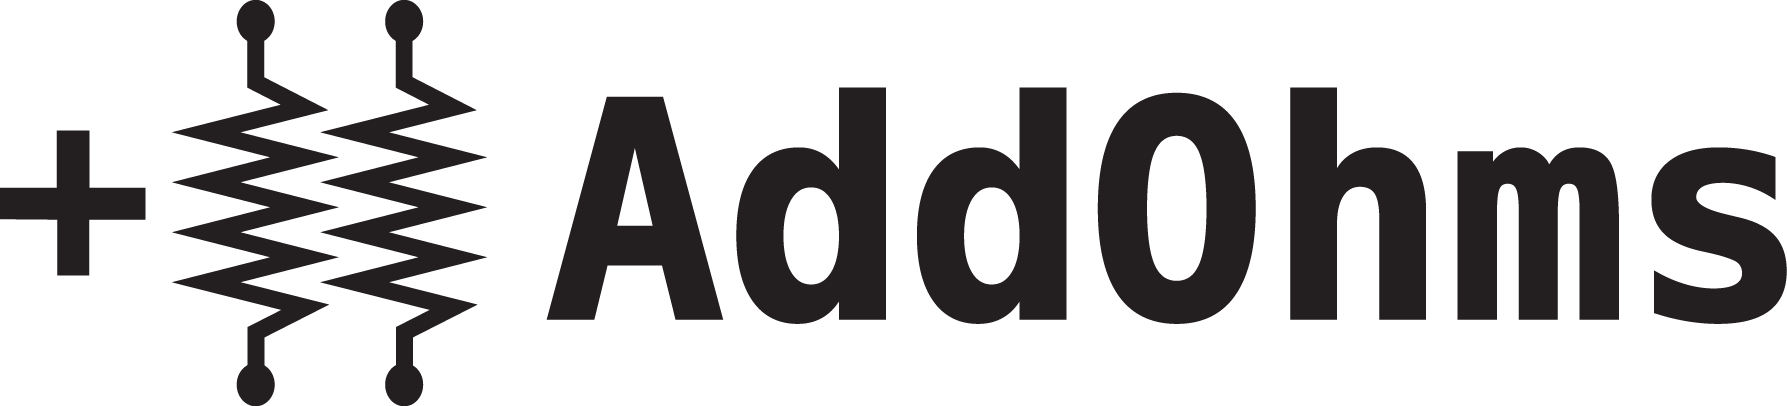 AddOhms by Bald Engineer